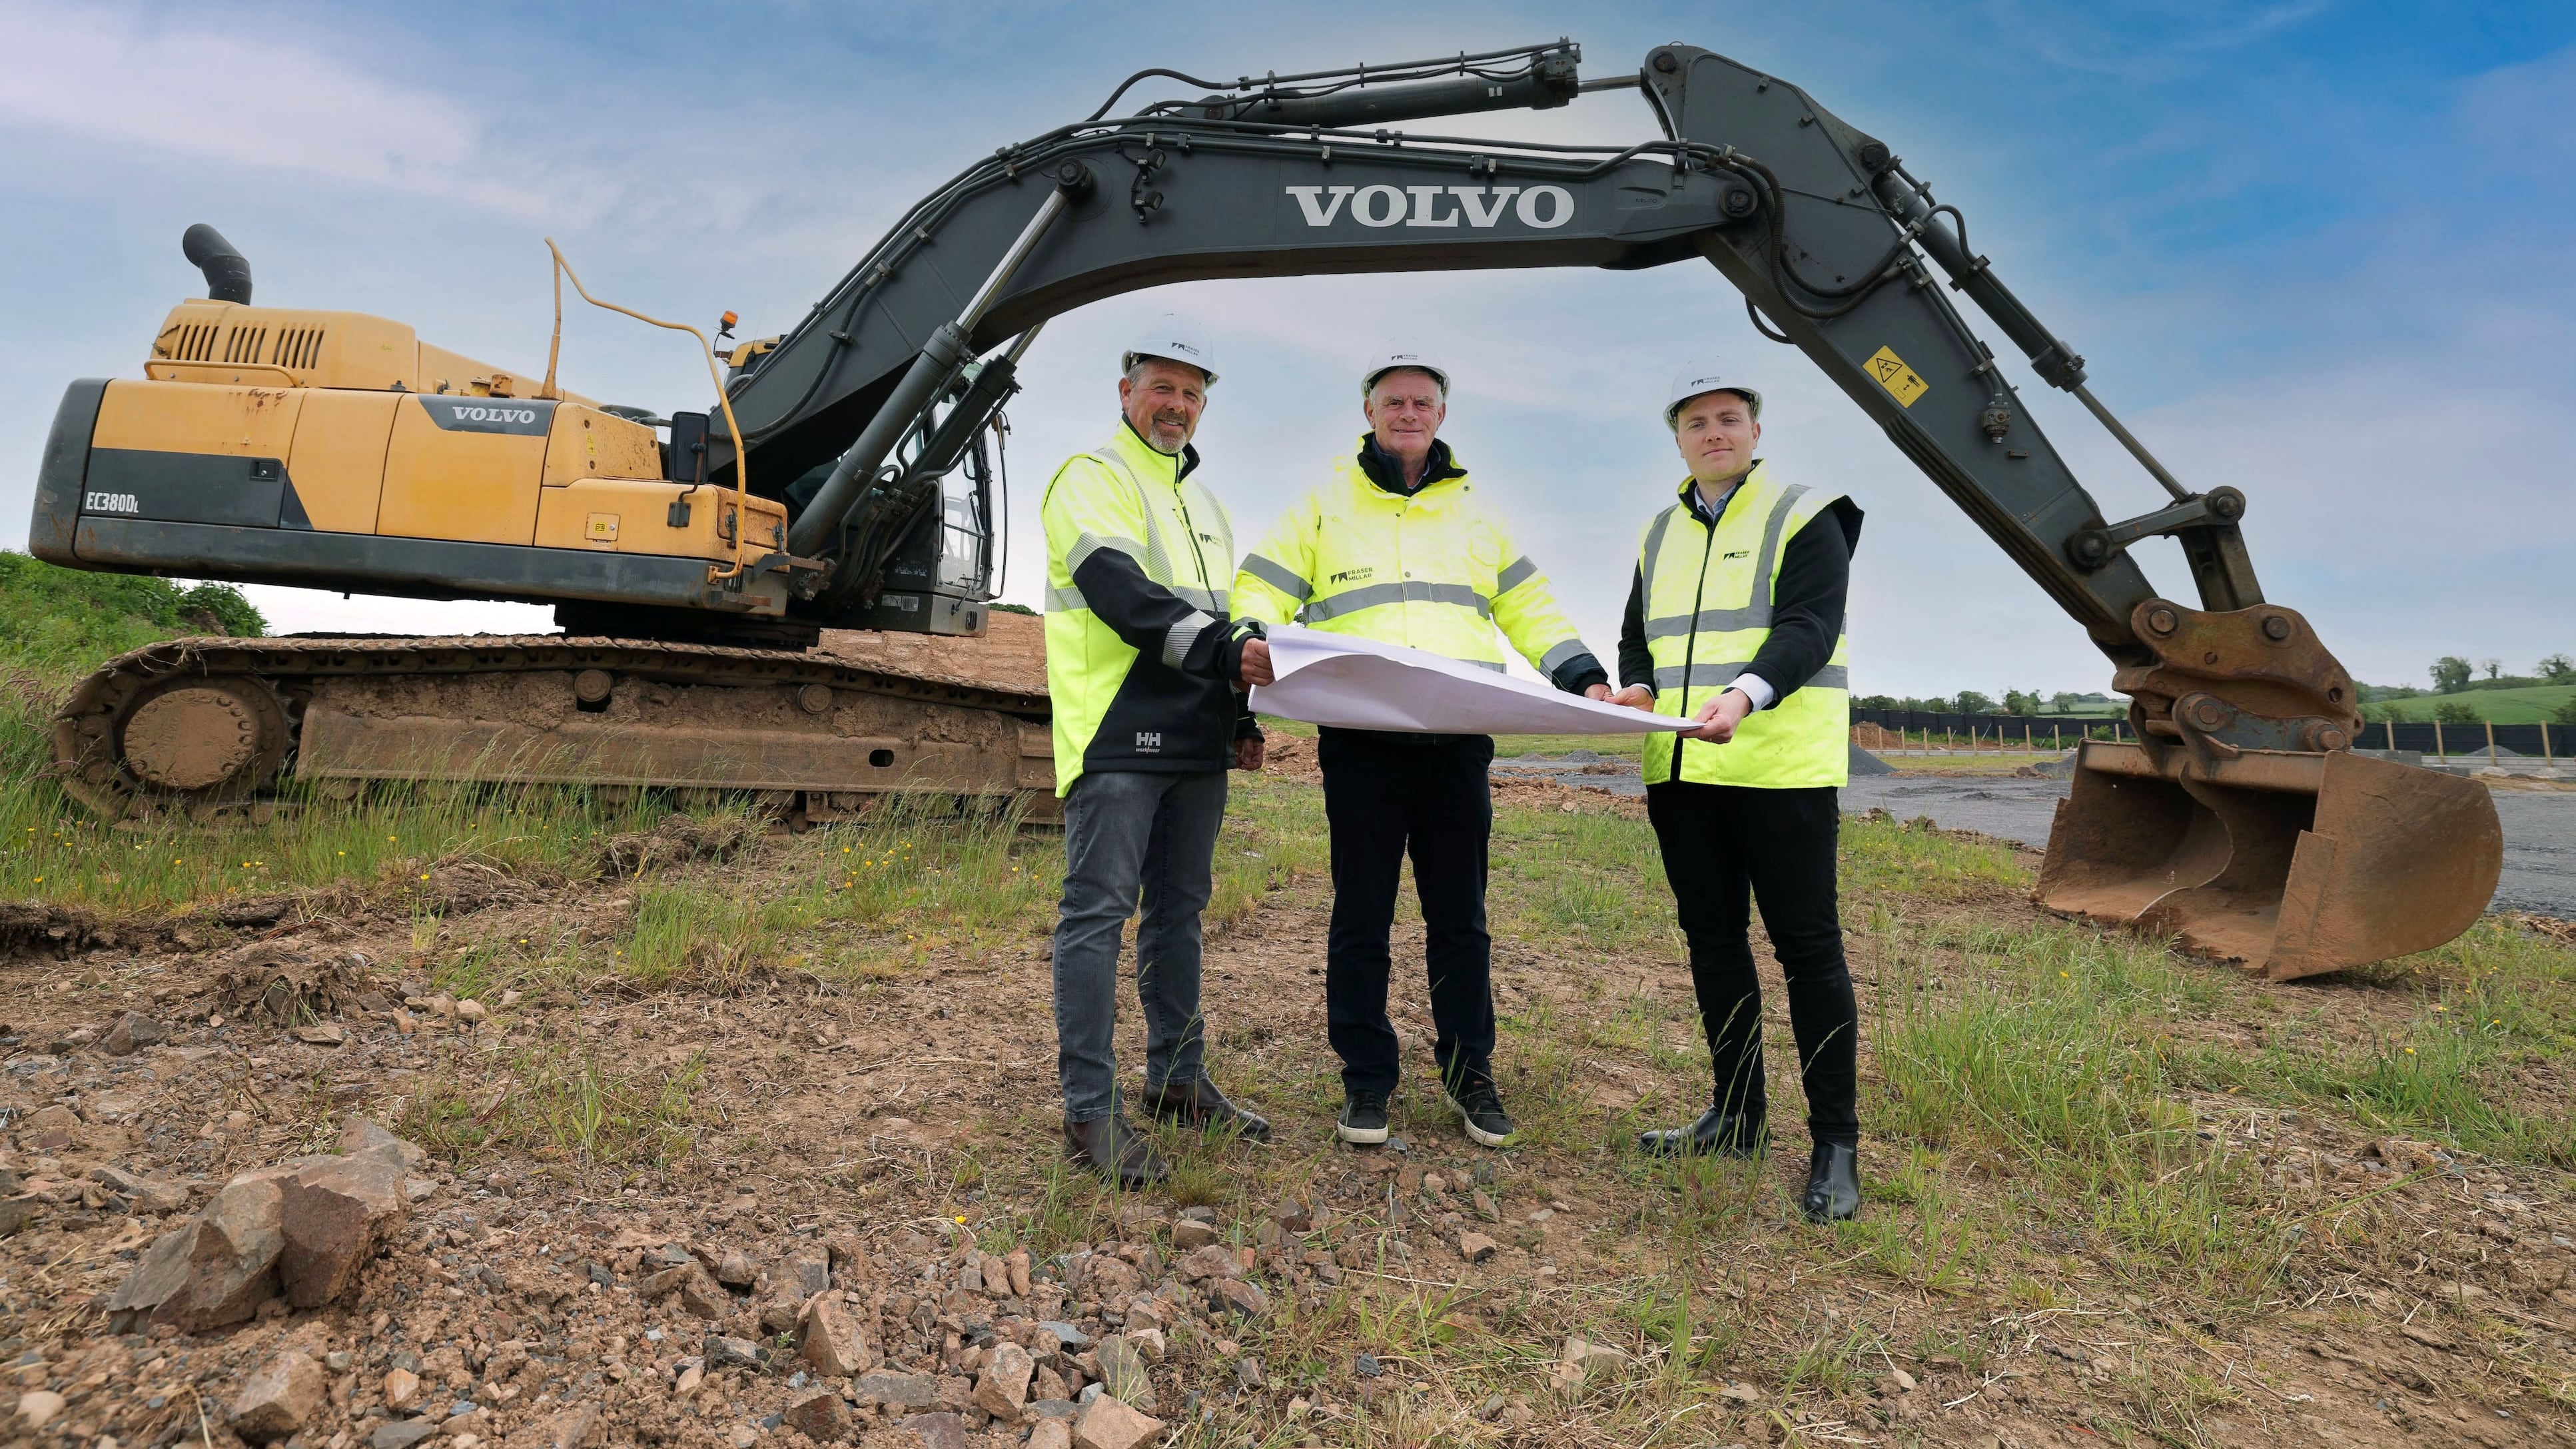 Belfast-based property developer, Fraser Millar has launched Beaufort Green, Northern Ireland’s second Passivhaus development worth £30m located on the Comber Road in Carryduff. Pictured are Fraser Millar’s Directors, from left, David Millar, John Carrigan and Charles Millar.